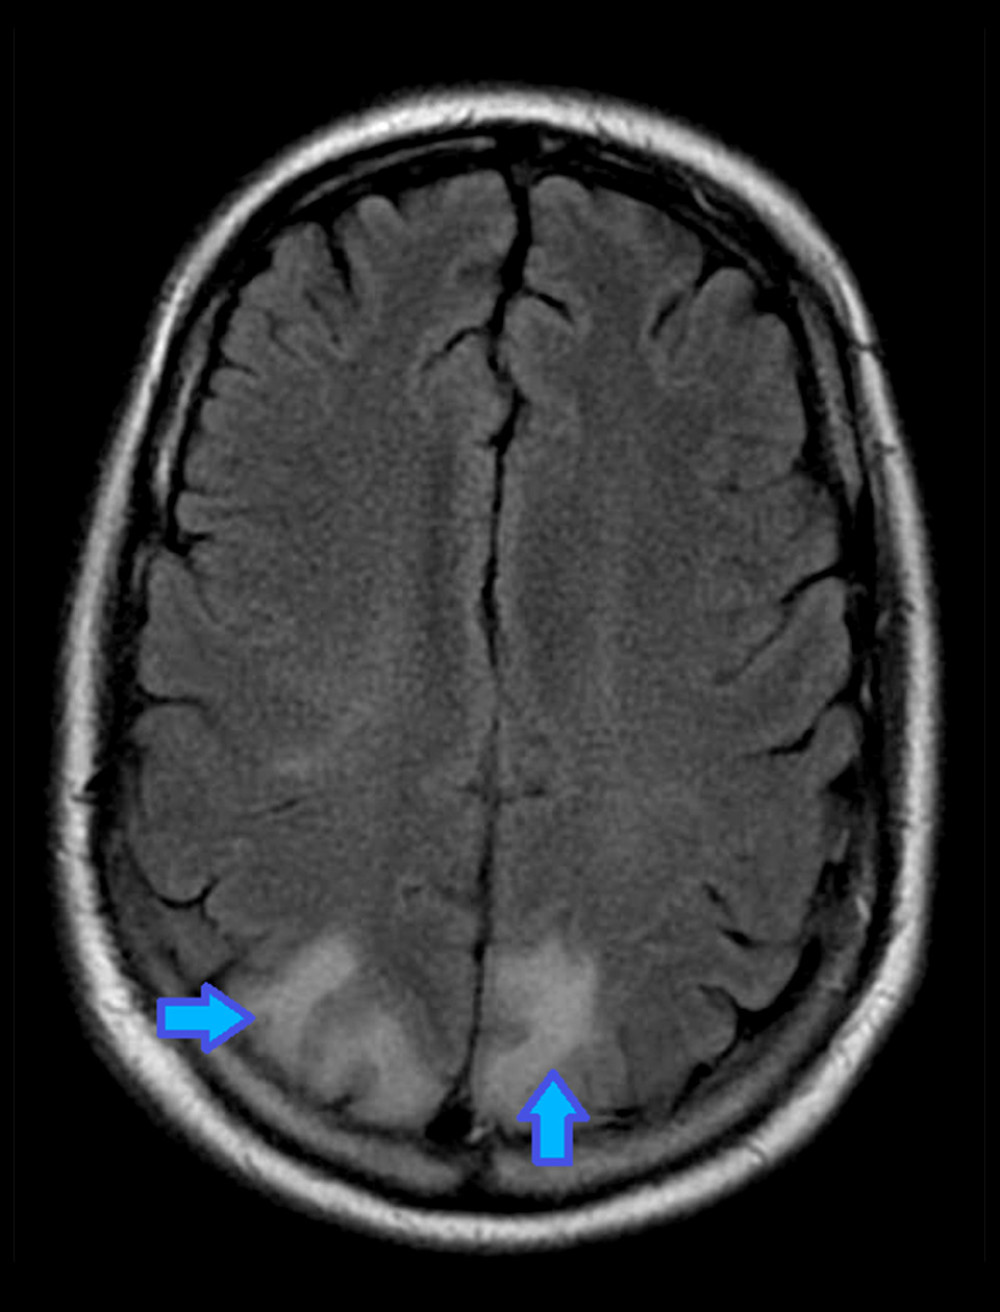 High T2/FLAIR signal intensities (blue arrows) in the regions of the parietal cortices.